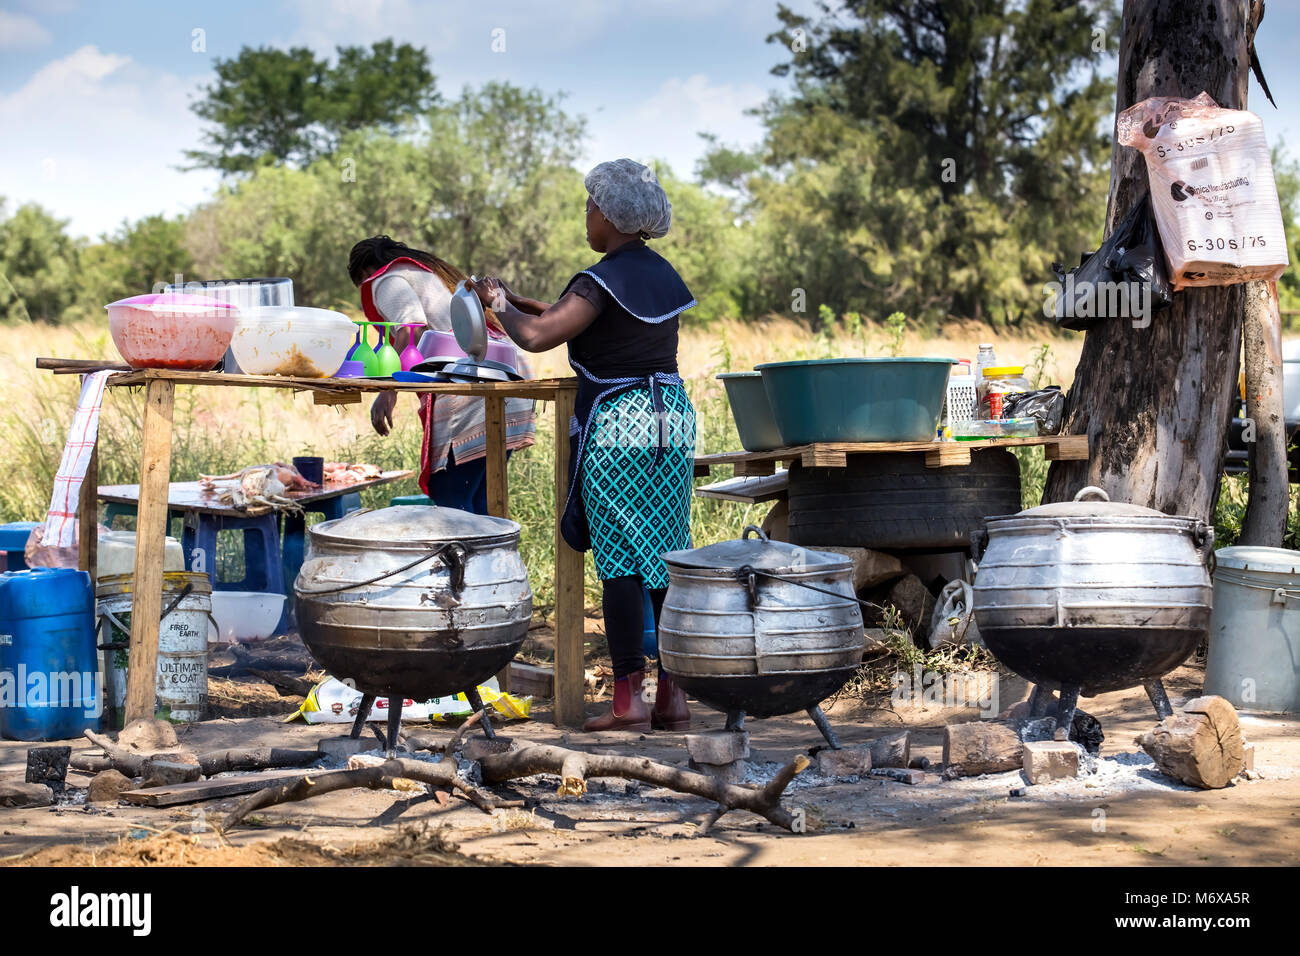 Roadside food stall with large cooking pots. Stock Photo